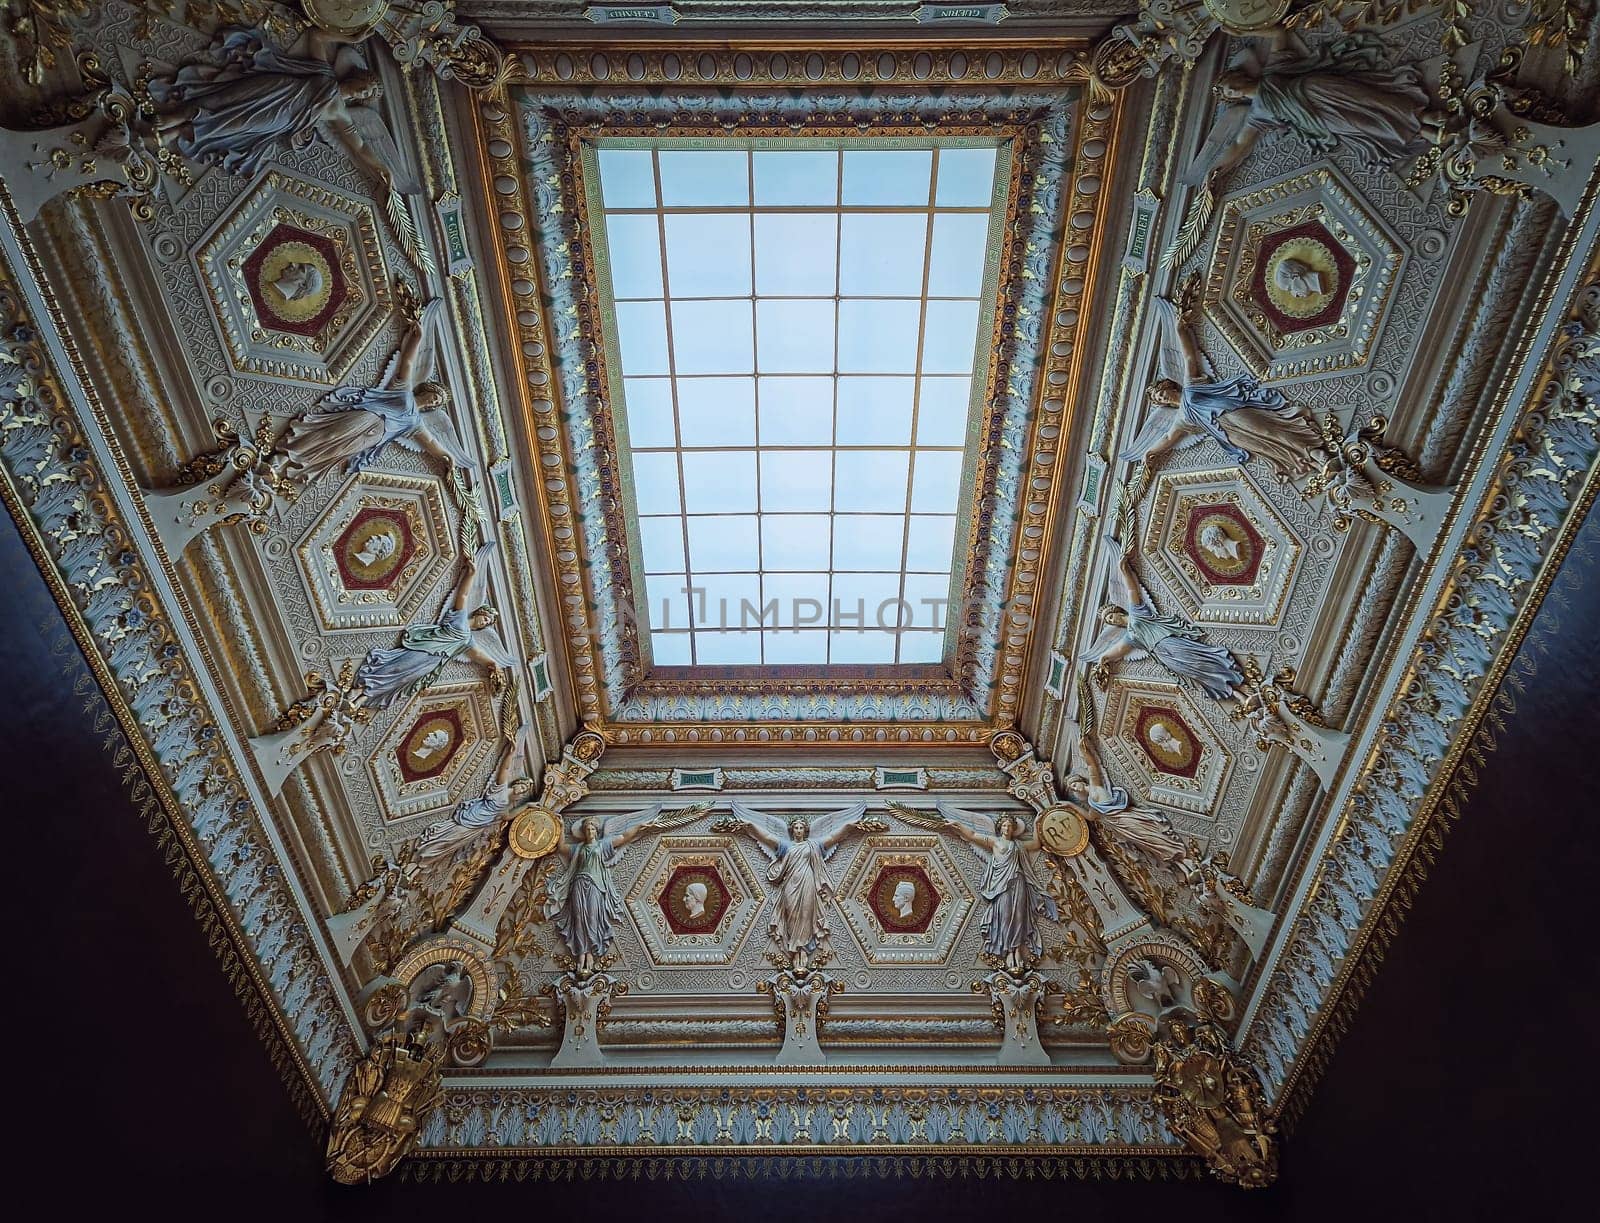 Louvre Palais ornate ceiling with glass window in center. Angels sculptures with golden decorations by psychoshadow